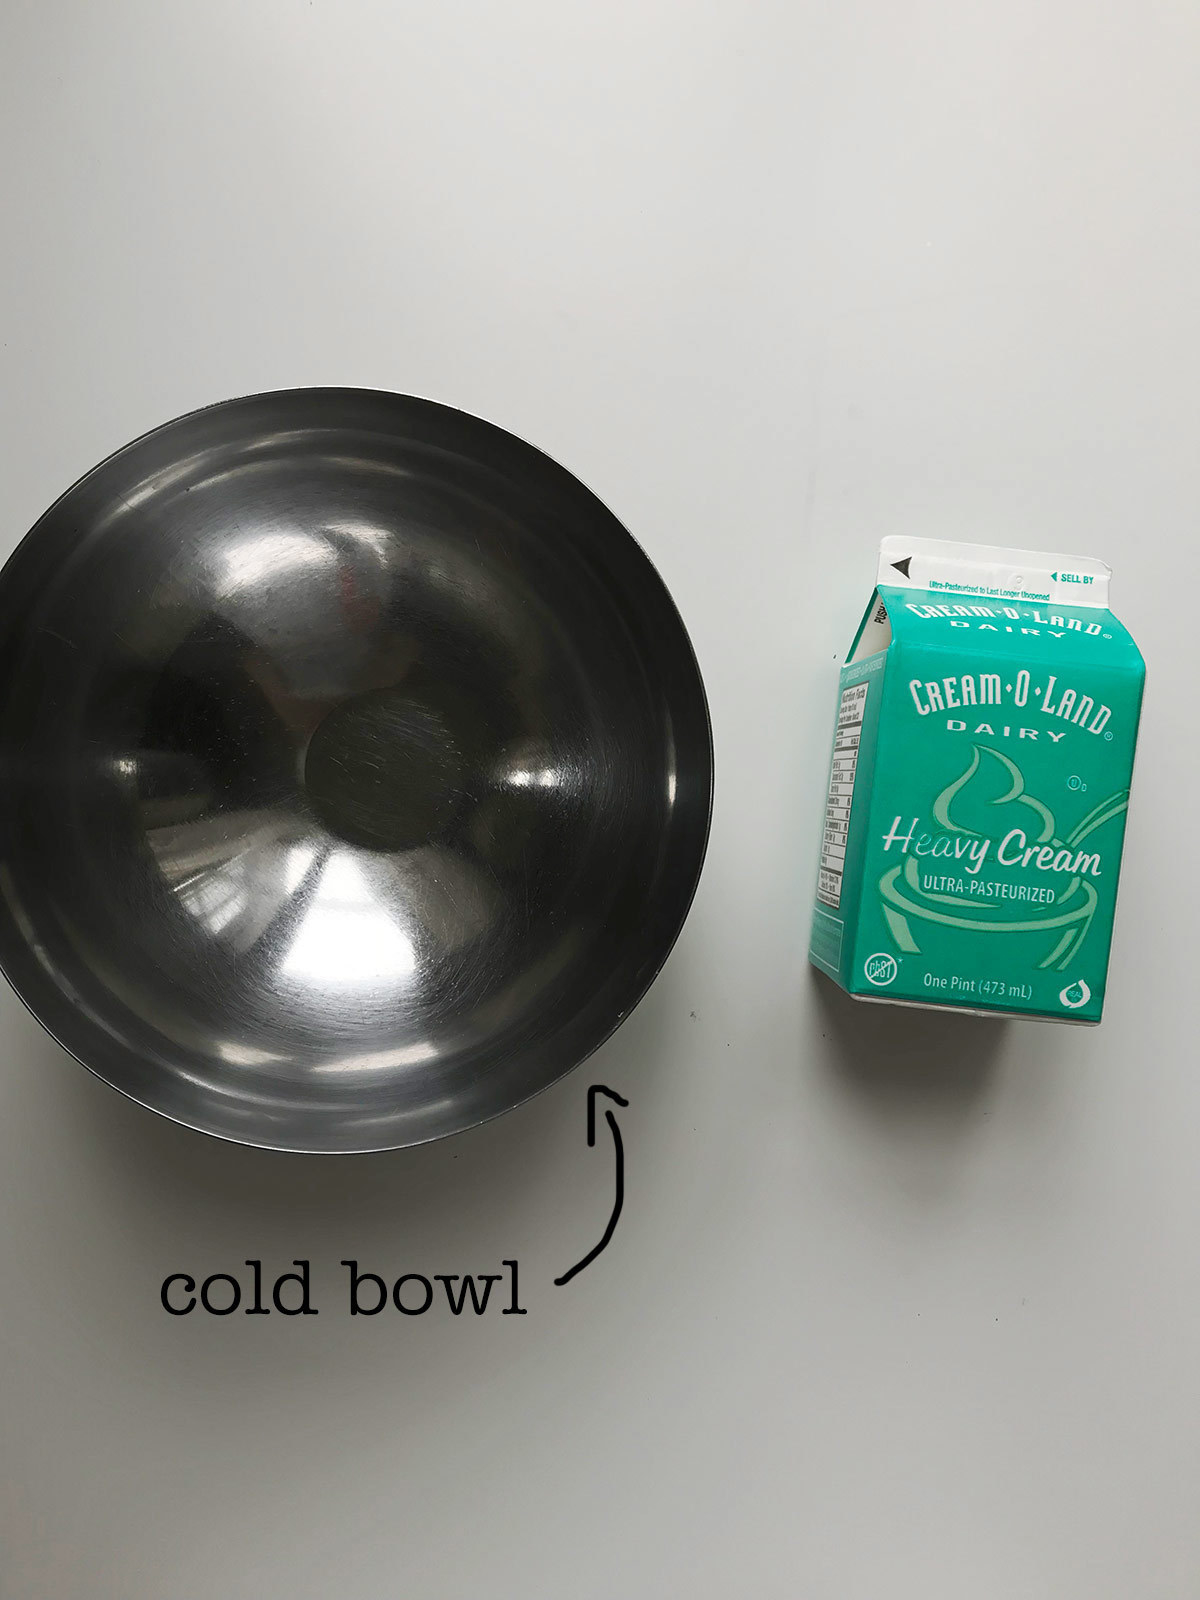 A cold stainless steel bowl and heavy whipping cream.